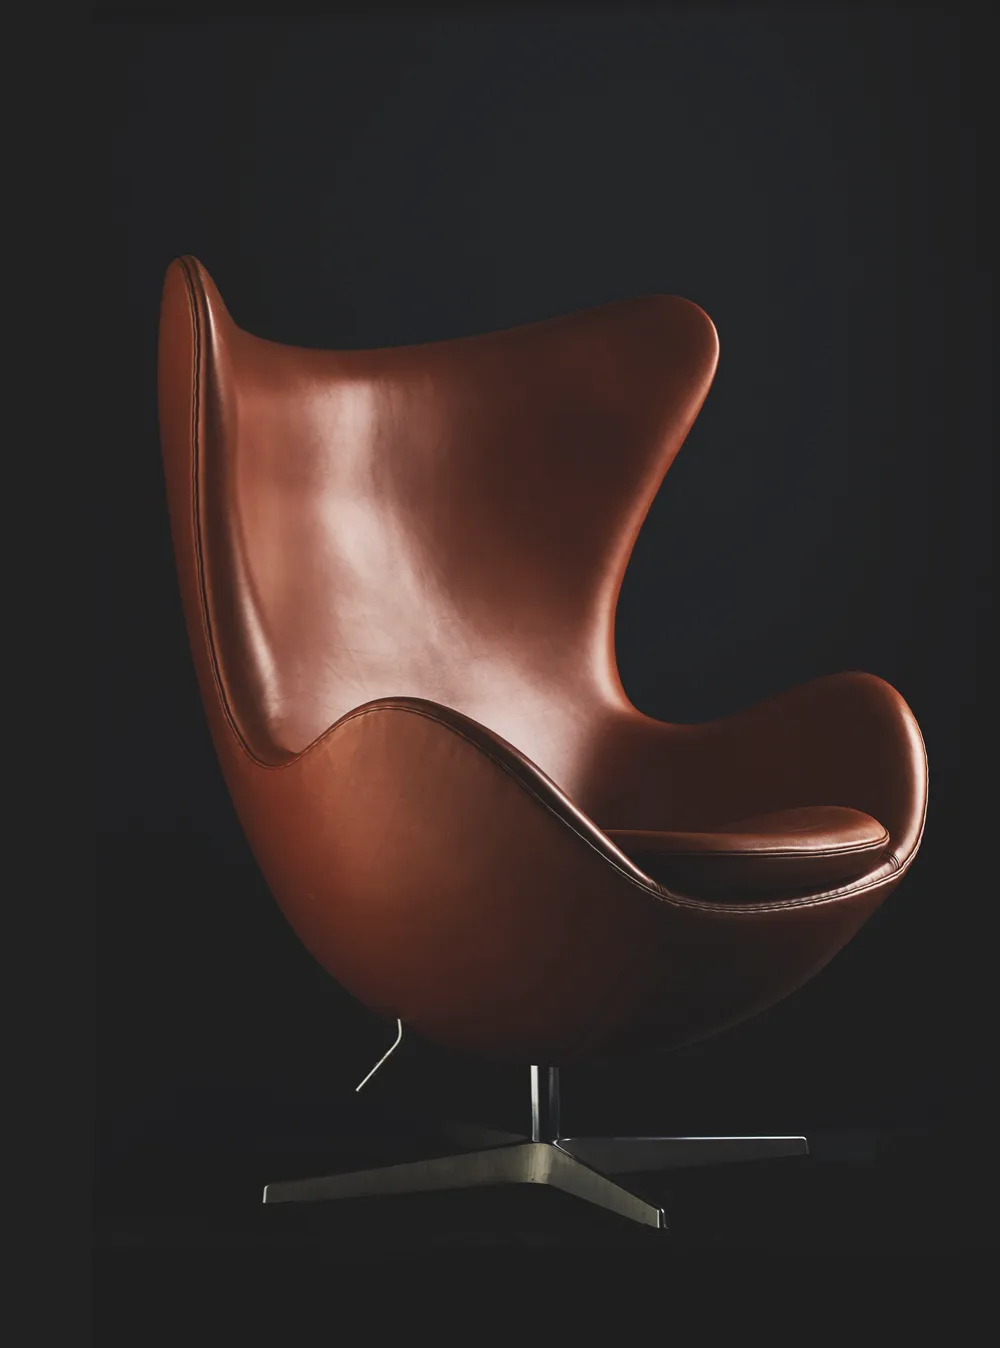 An Arne Jacobsen Egg Chair in luxurious brown leather